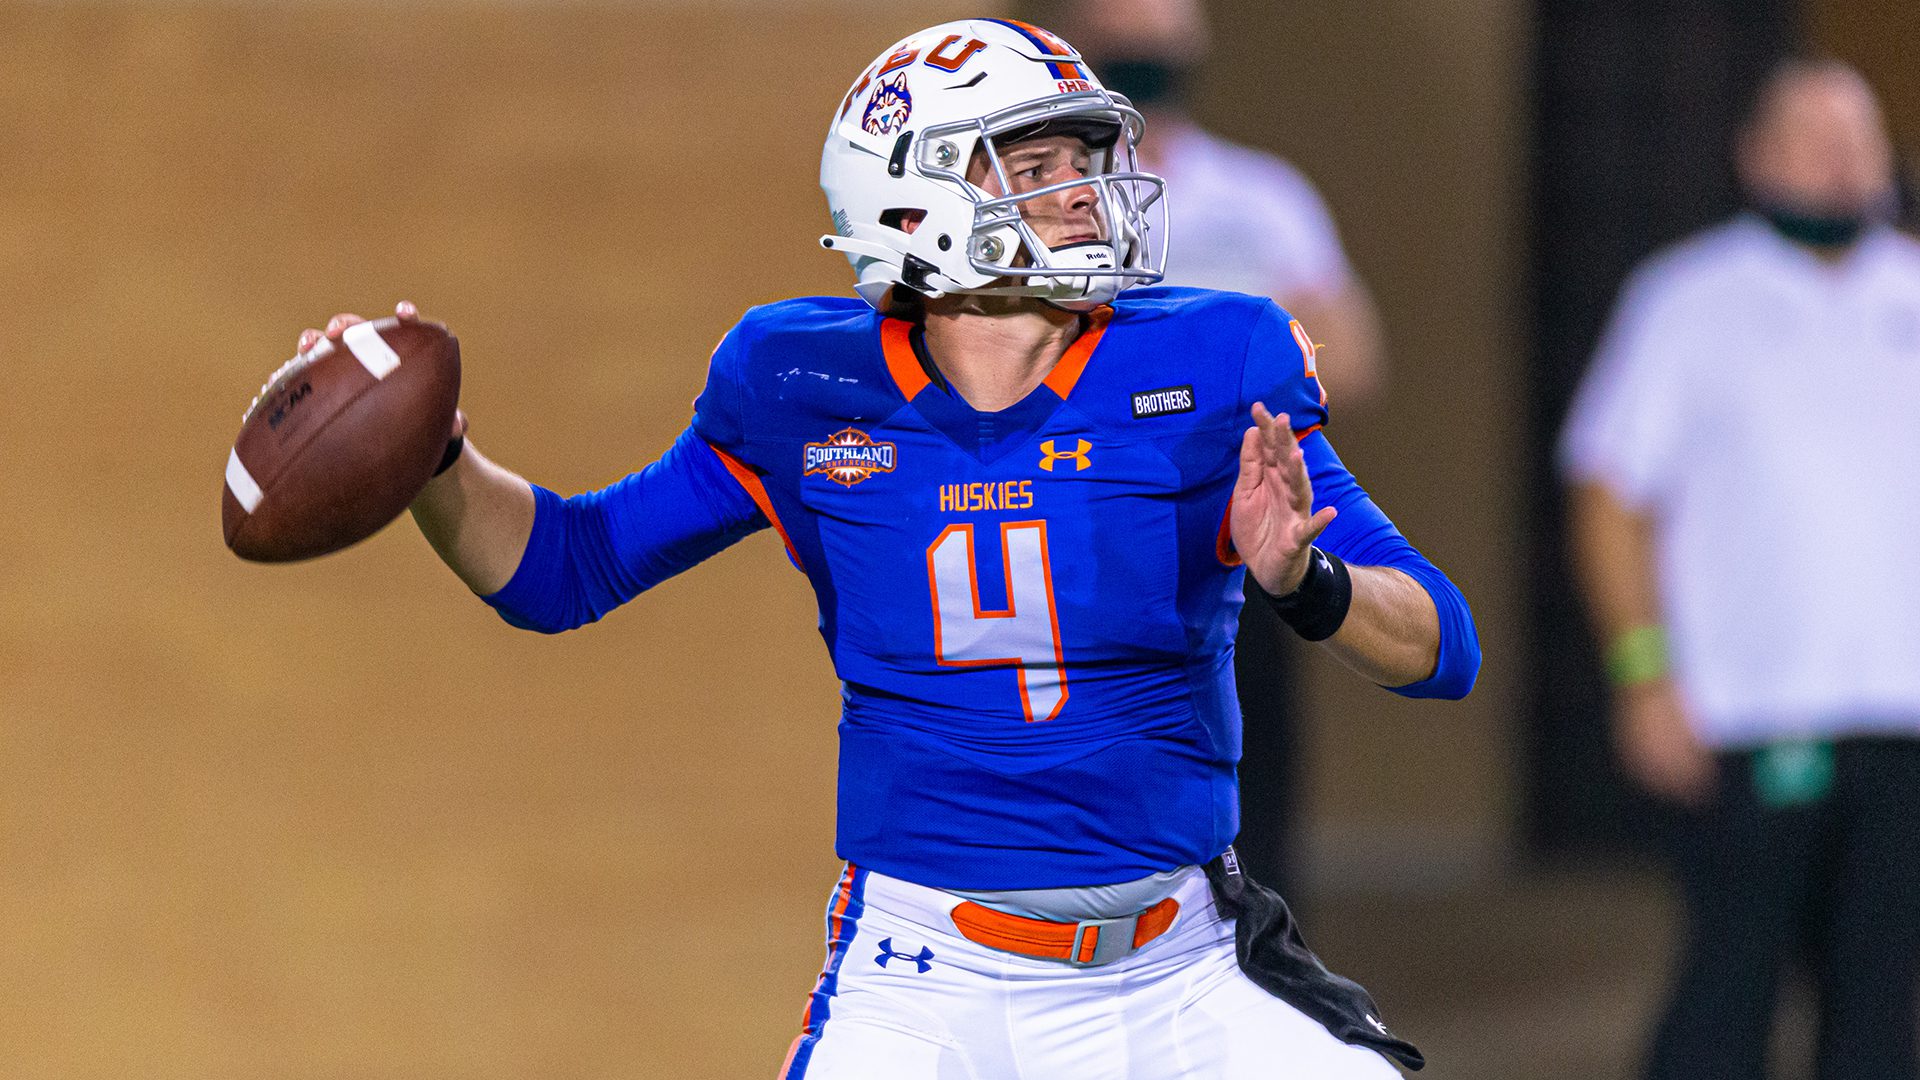 Houston Baptist QB Bailey Zappe is a Fiercely competitive draft prospect